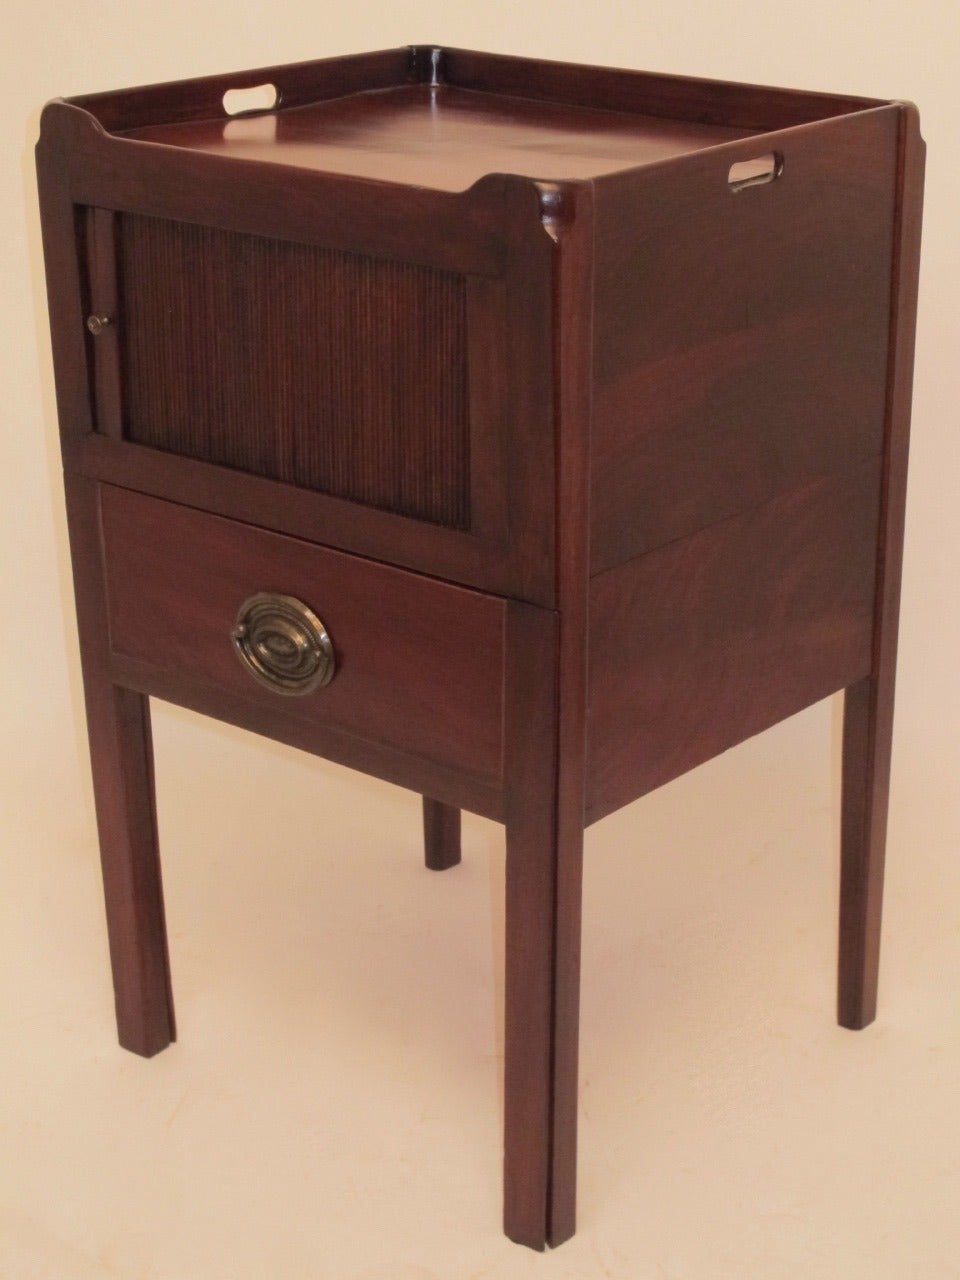 A fine Georgian period gentleman's commode or bedside table with tambour door and single drawer with lift up lid. England, circa 1820.